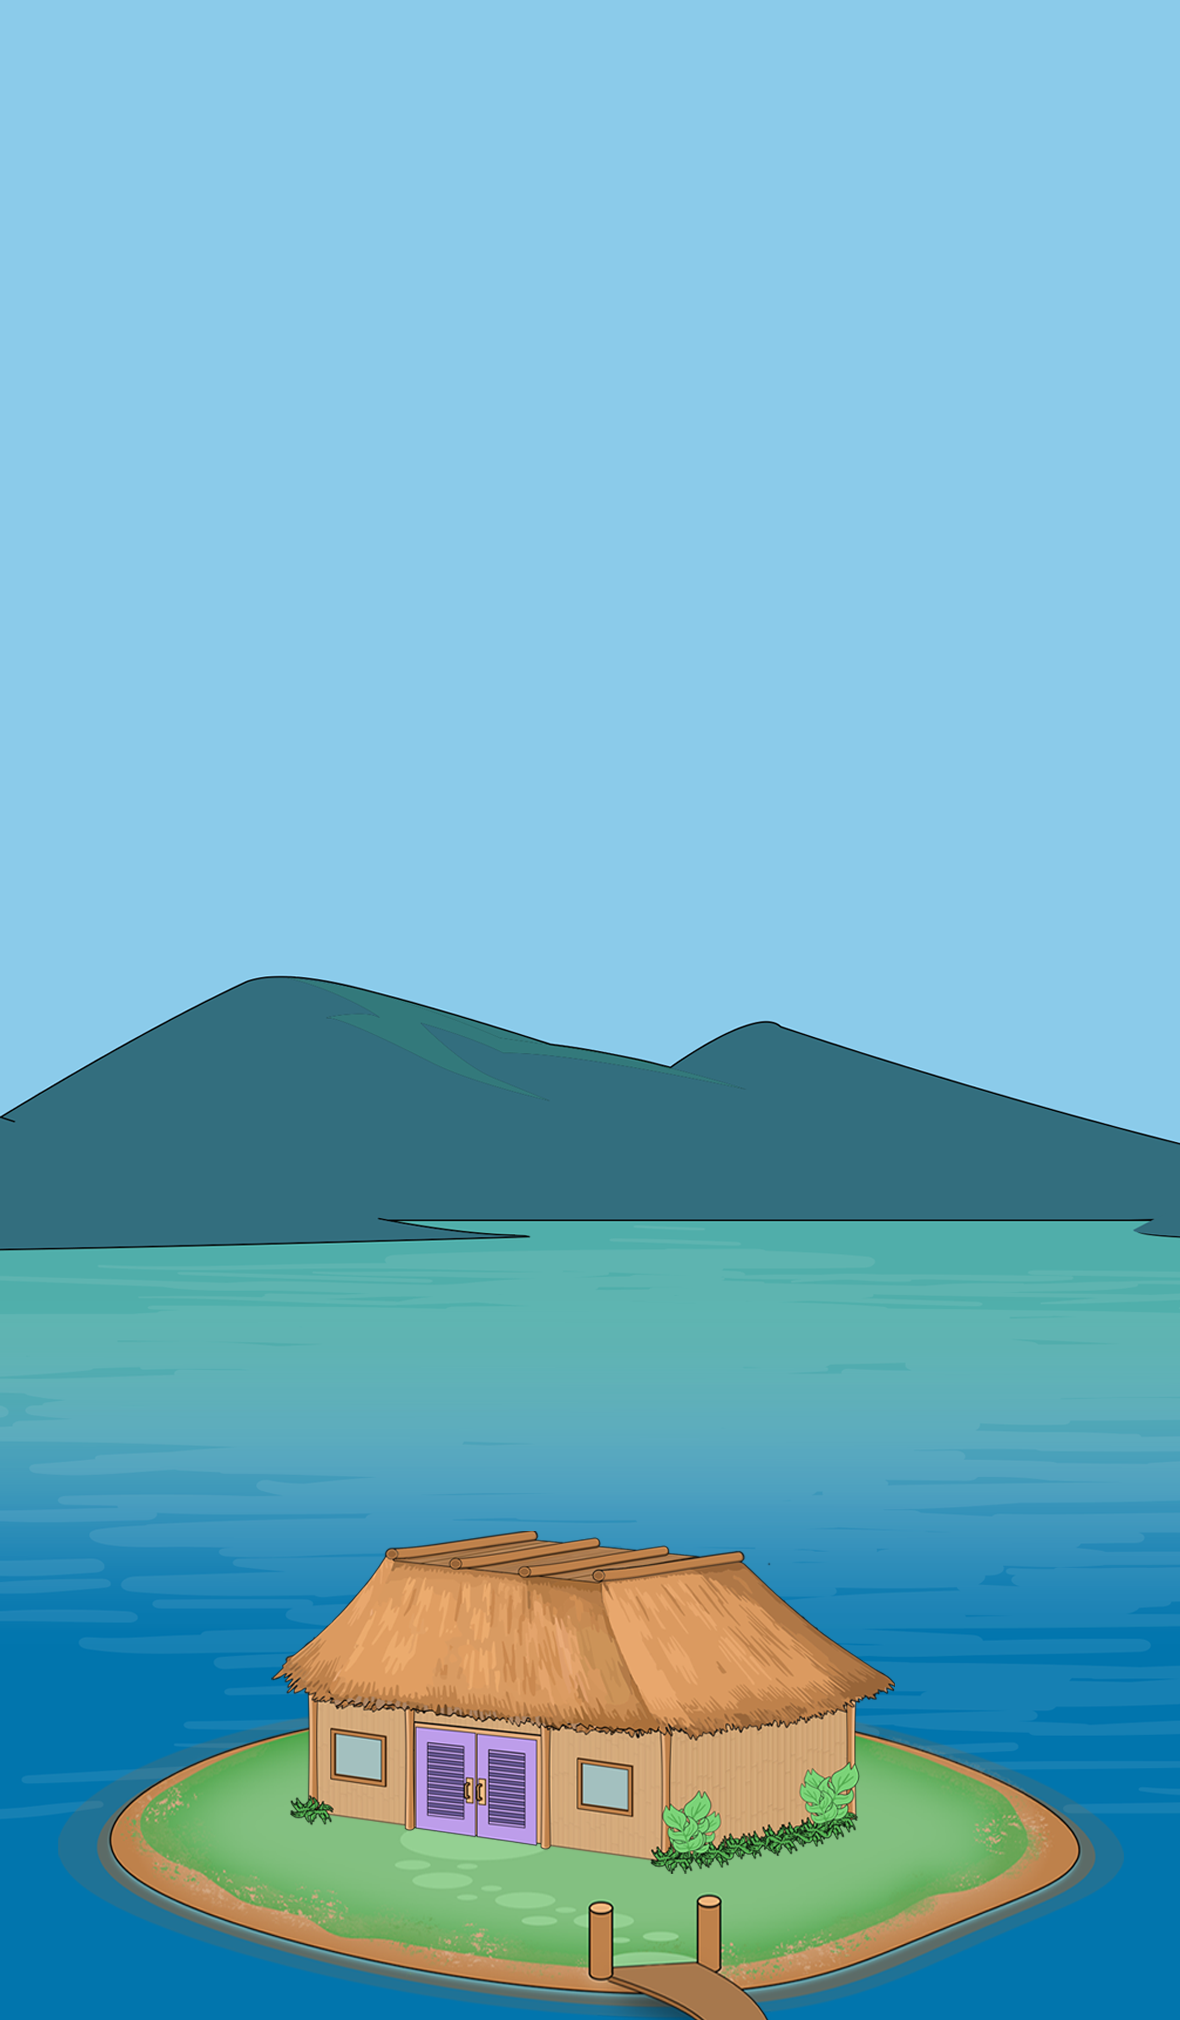 Small cartoonish tropical island background, on the ocean, hut in the foreground